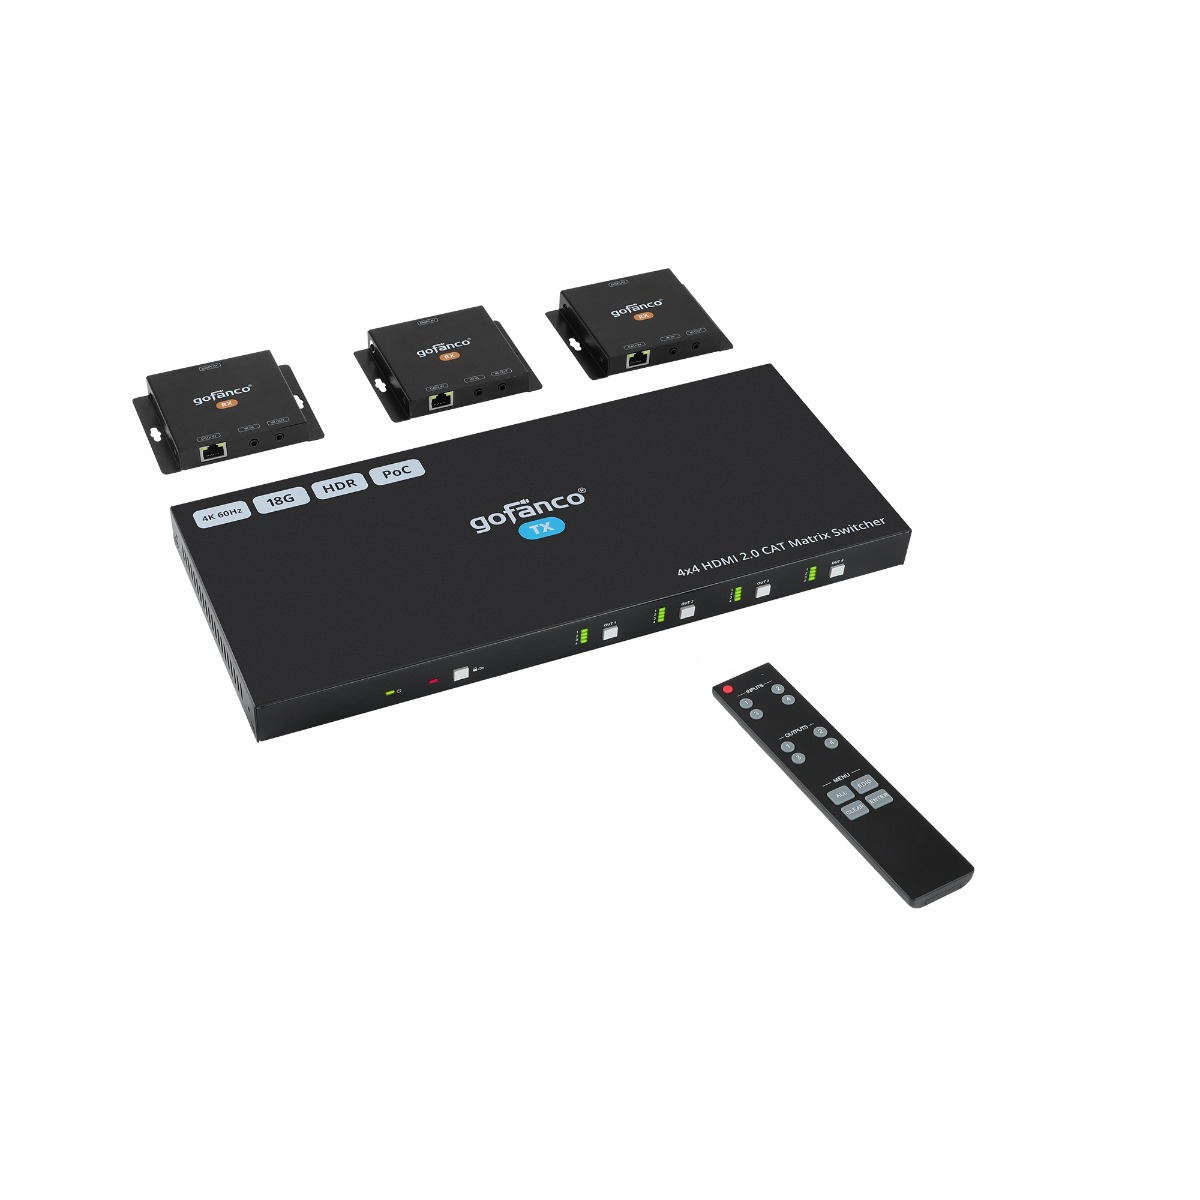 18Gbps EDID 4K 60Hz YUV 4:4:4, HDR HDCP 2.2/1.4 SPDIF Audio Output Extractor 4 In 4 Out Video gofanco 4x4 HDMI 2.0 Matrix Switcher W/IR Remote & Web GUI Control - - HDMI 2.0 RS-232 